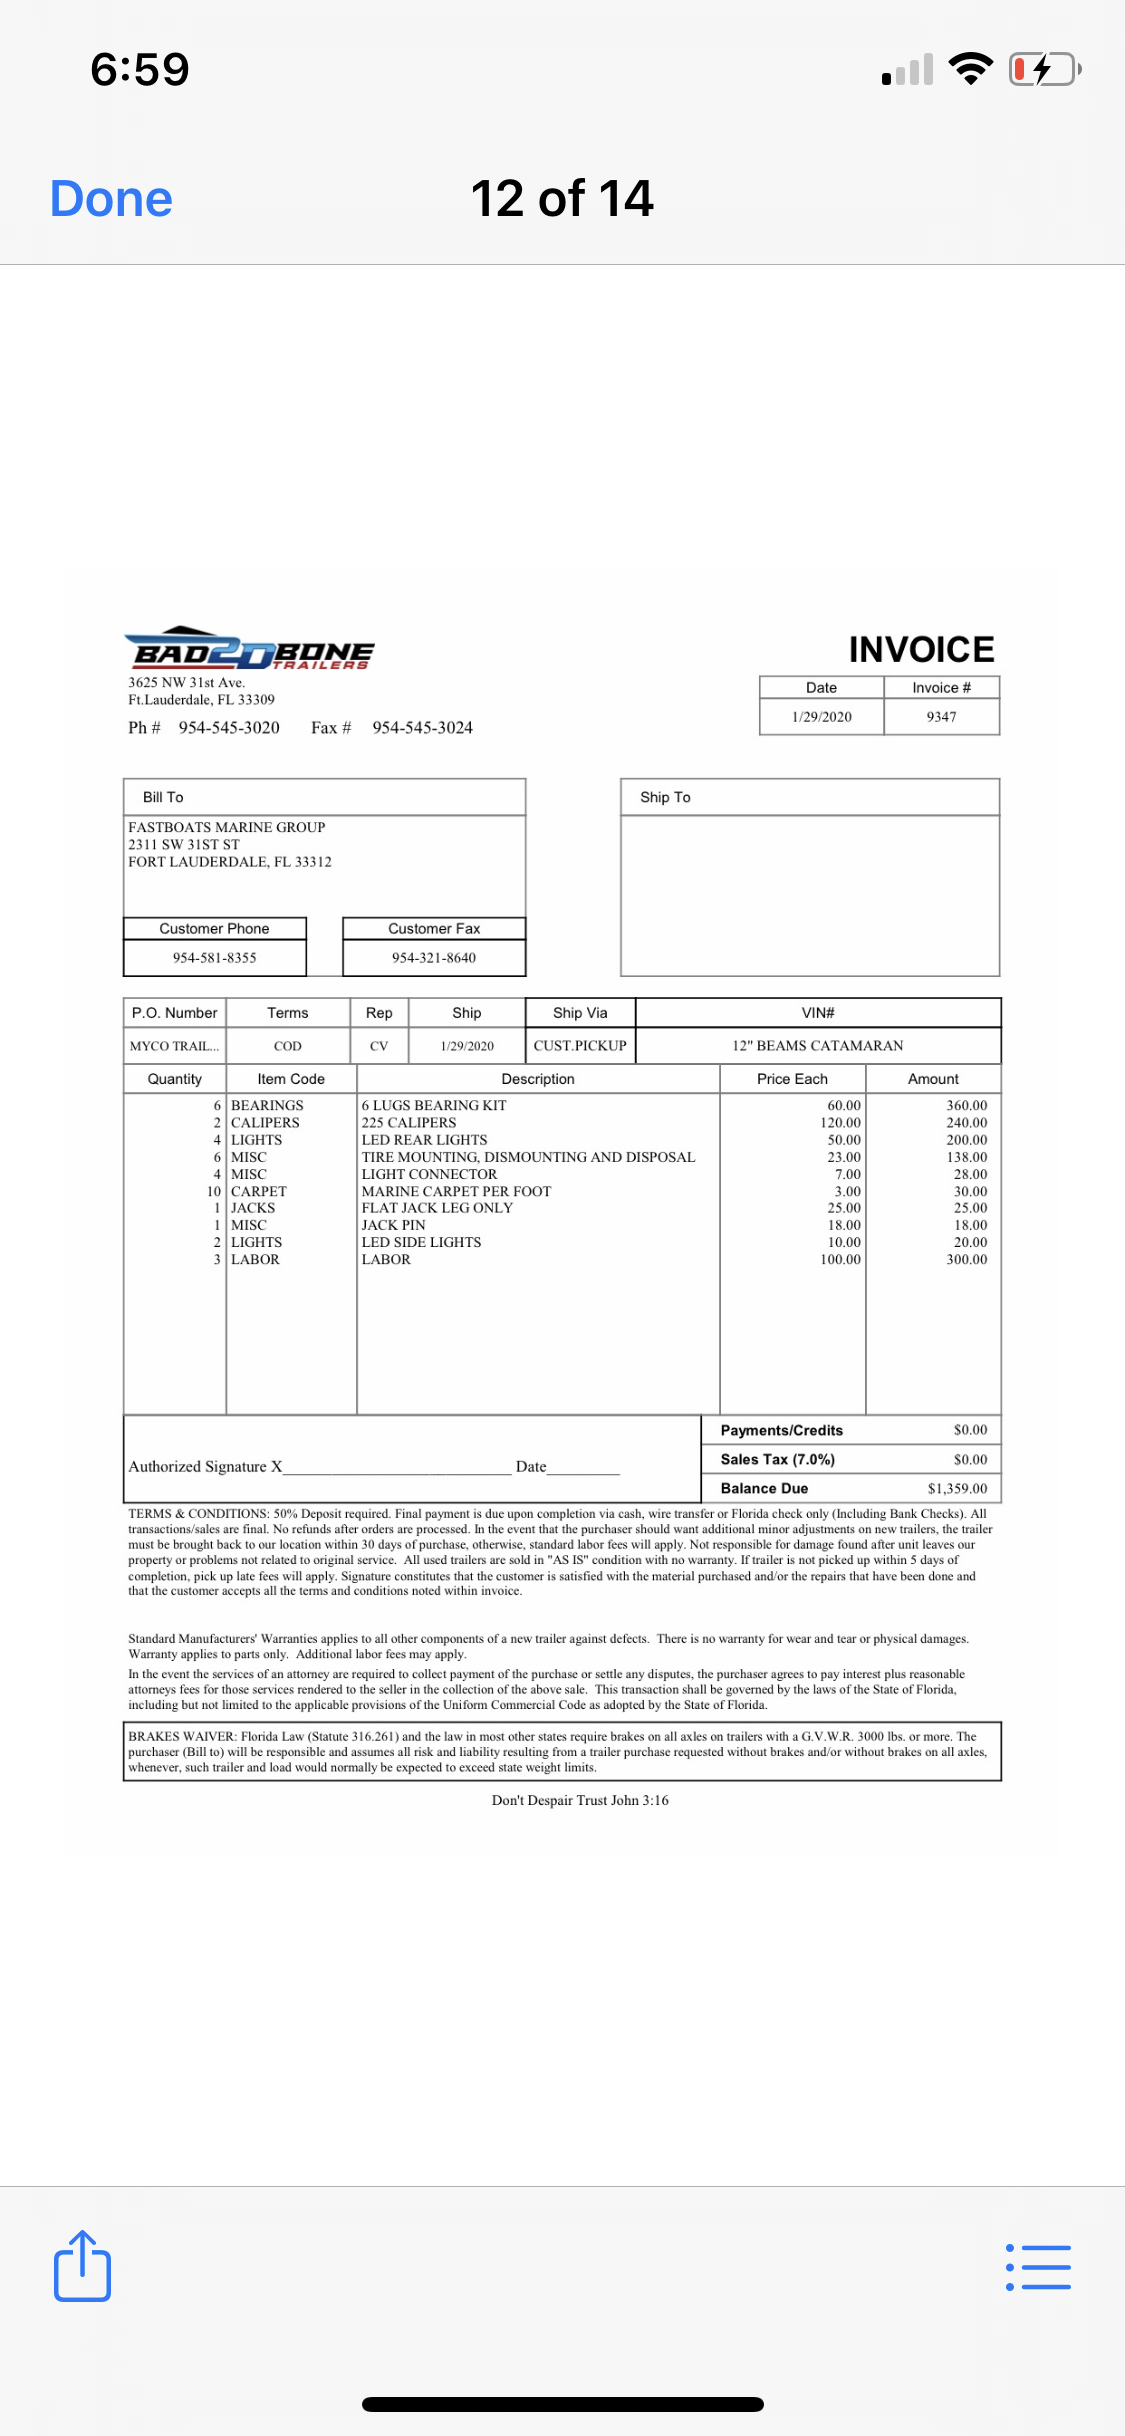 labor from randy sweers invoice shows $300